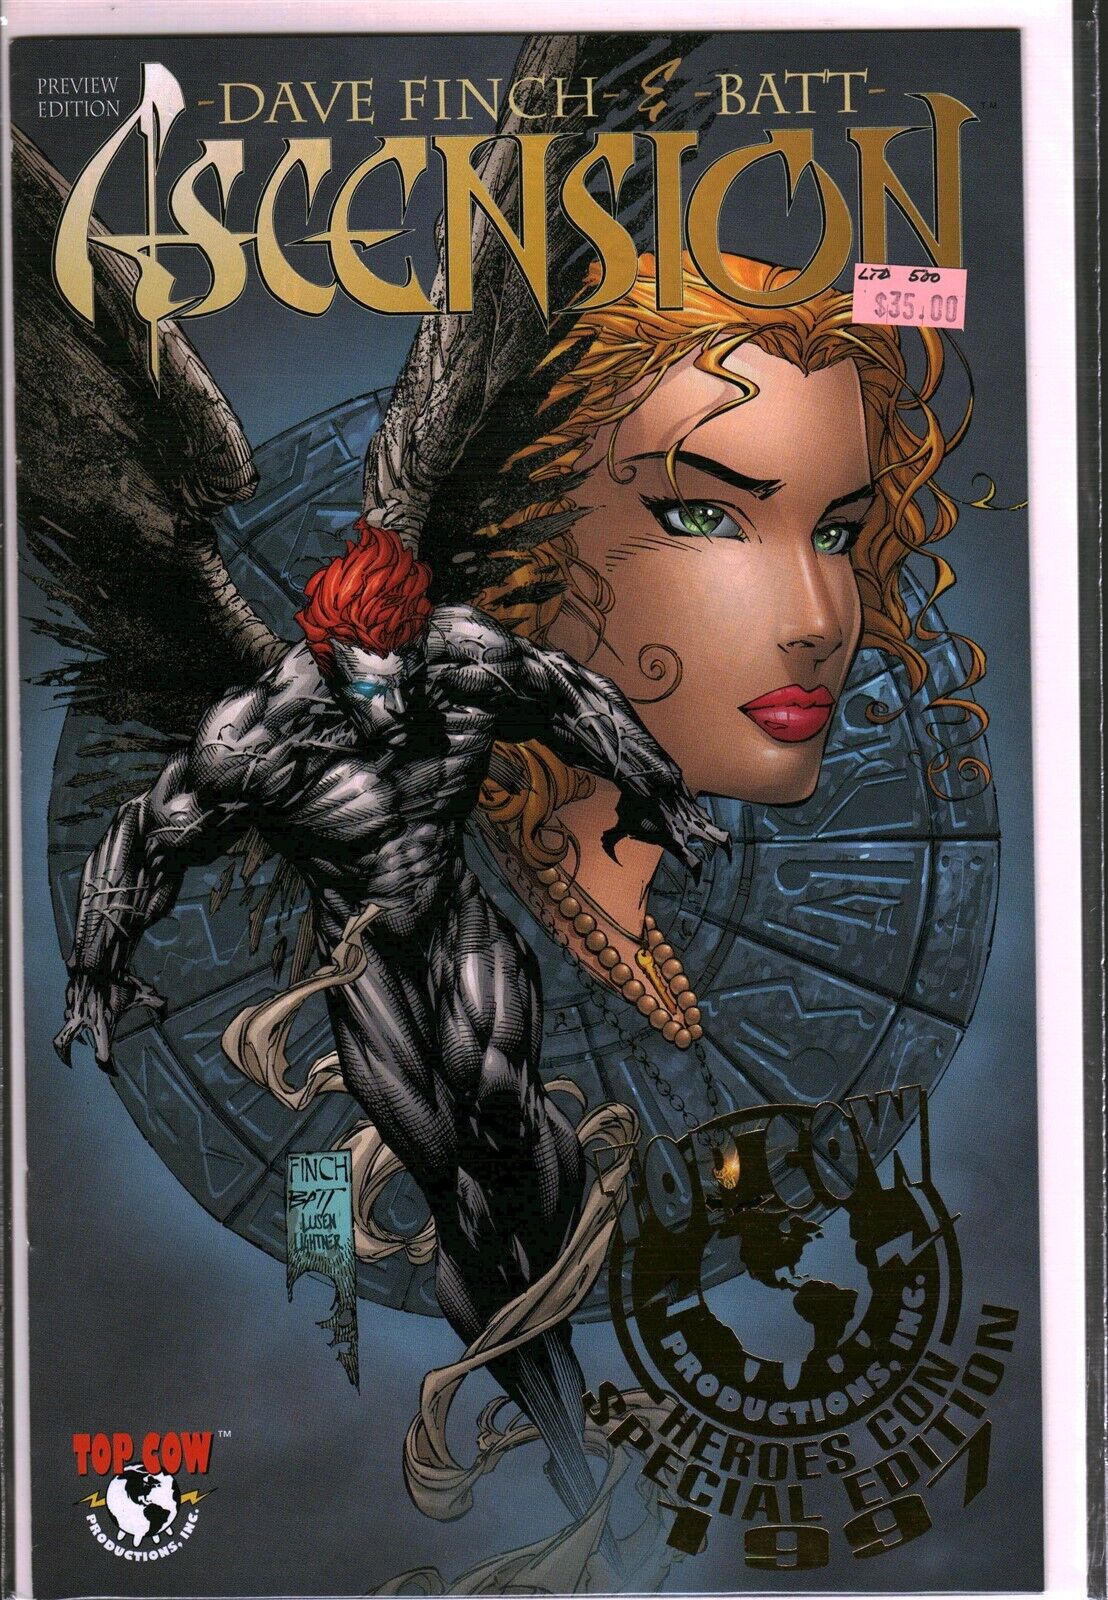 Top Cow Comics Ascension Heroes-Con Special Preview Edition Comic Book 1997